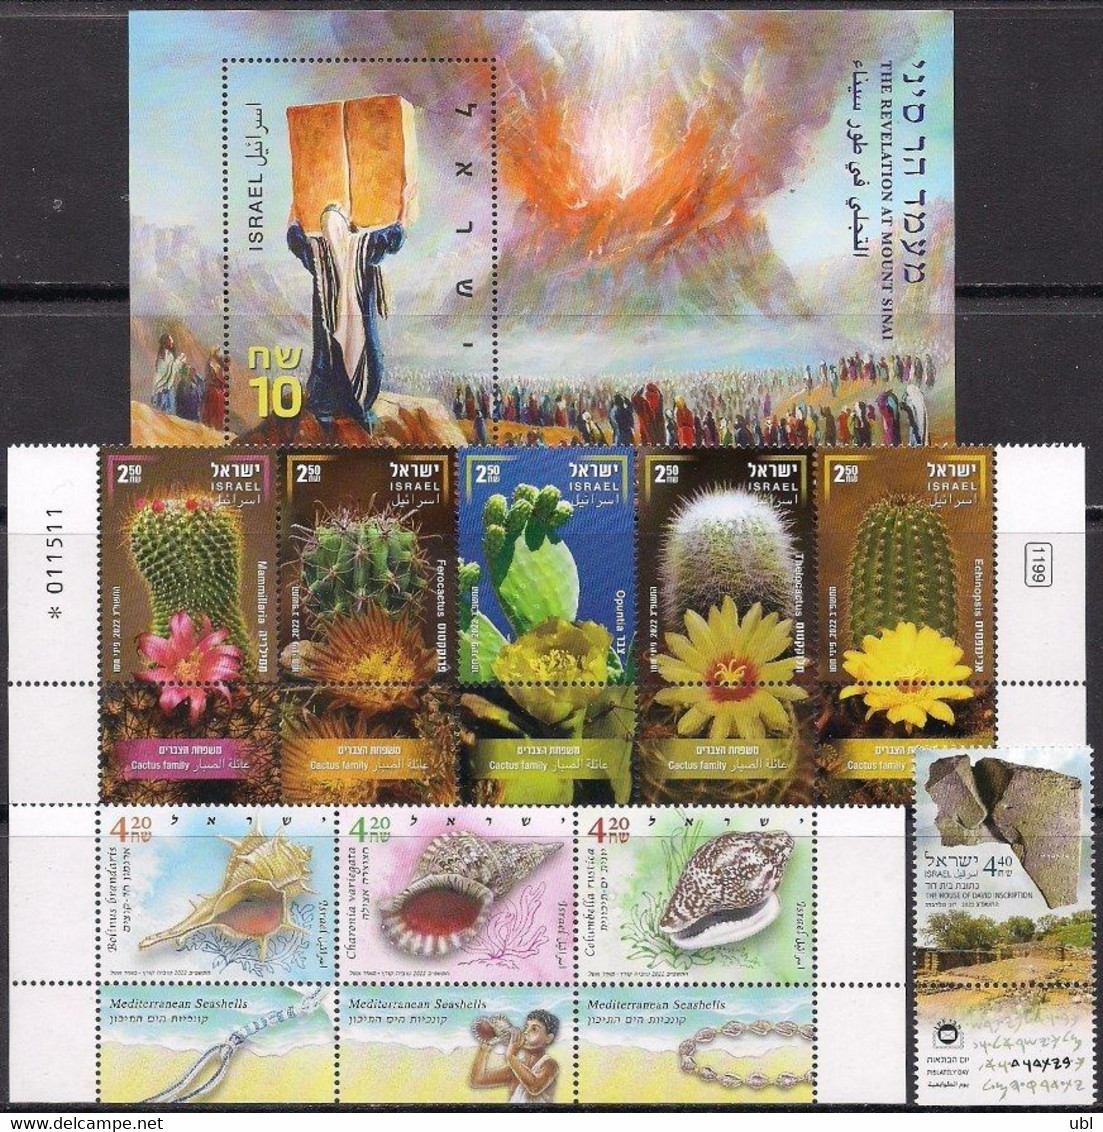 ISRAEL 2022 YEARBOOK - THE COMPLETE ANNUAL STAMPS & SOUVENIR SHEET ISSUE IN A DECORATIVE ALBUM - Verzamelingen & Reeksen